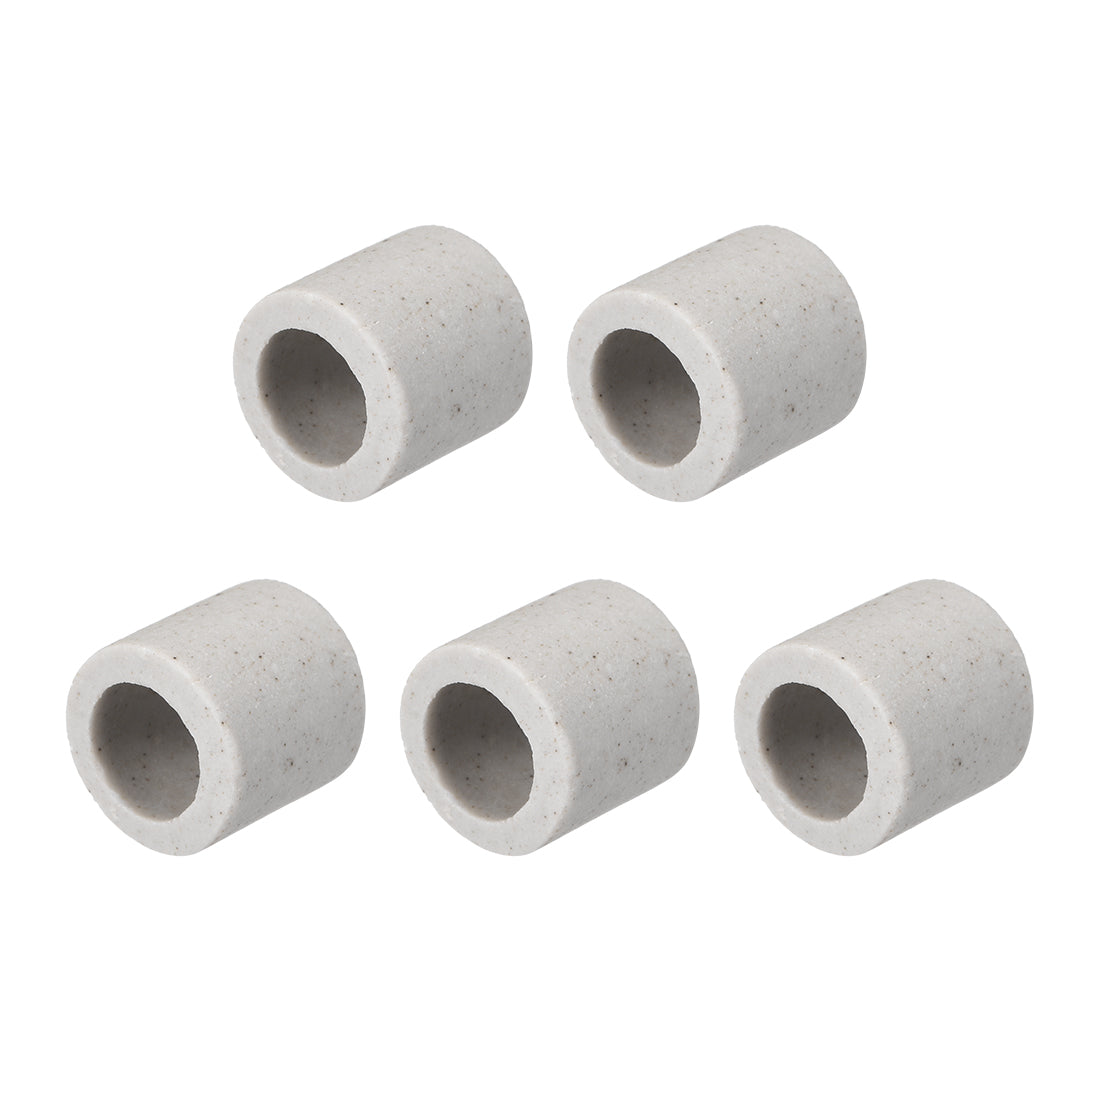 uxcell Uxcell 8mm Dia Ceramic Insulation Tube Single Bore Porcelain Insulator Pipe 5 Pcs